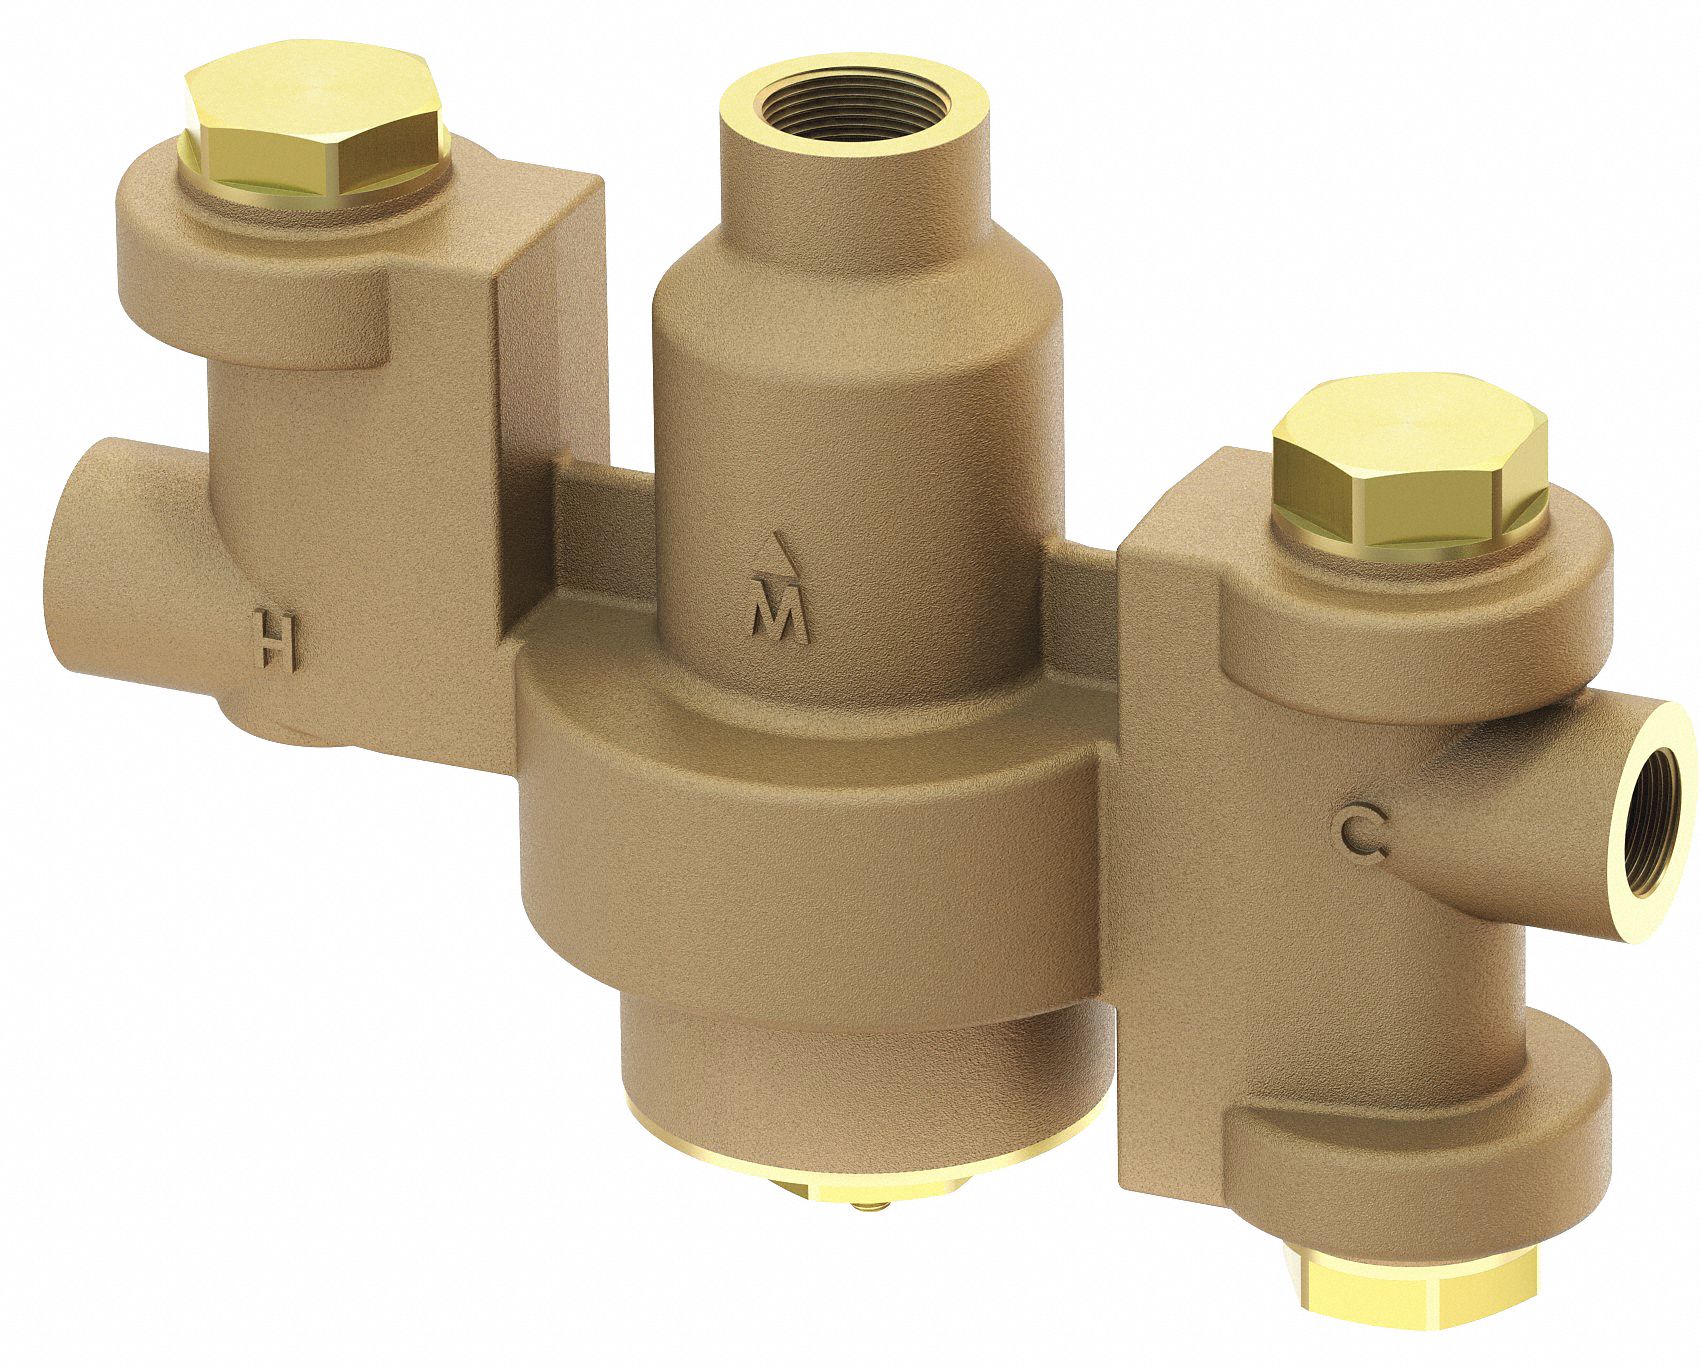 Thermostatic Mixing Valve: Brass, 86 gpm Flow Rate, NPT Inlet, NPT Outlet